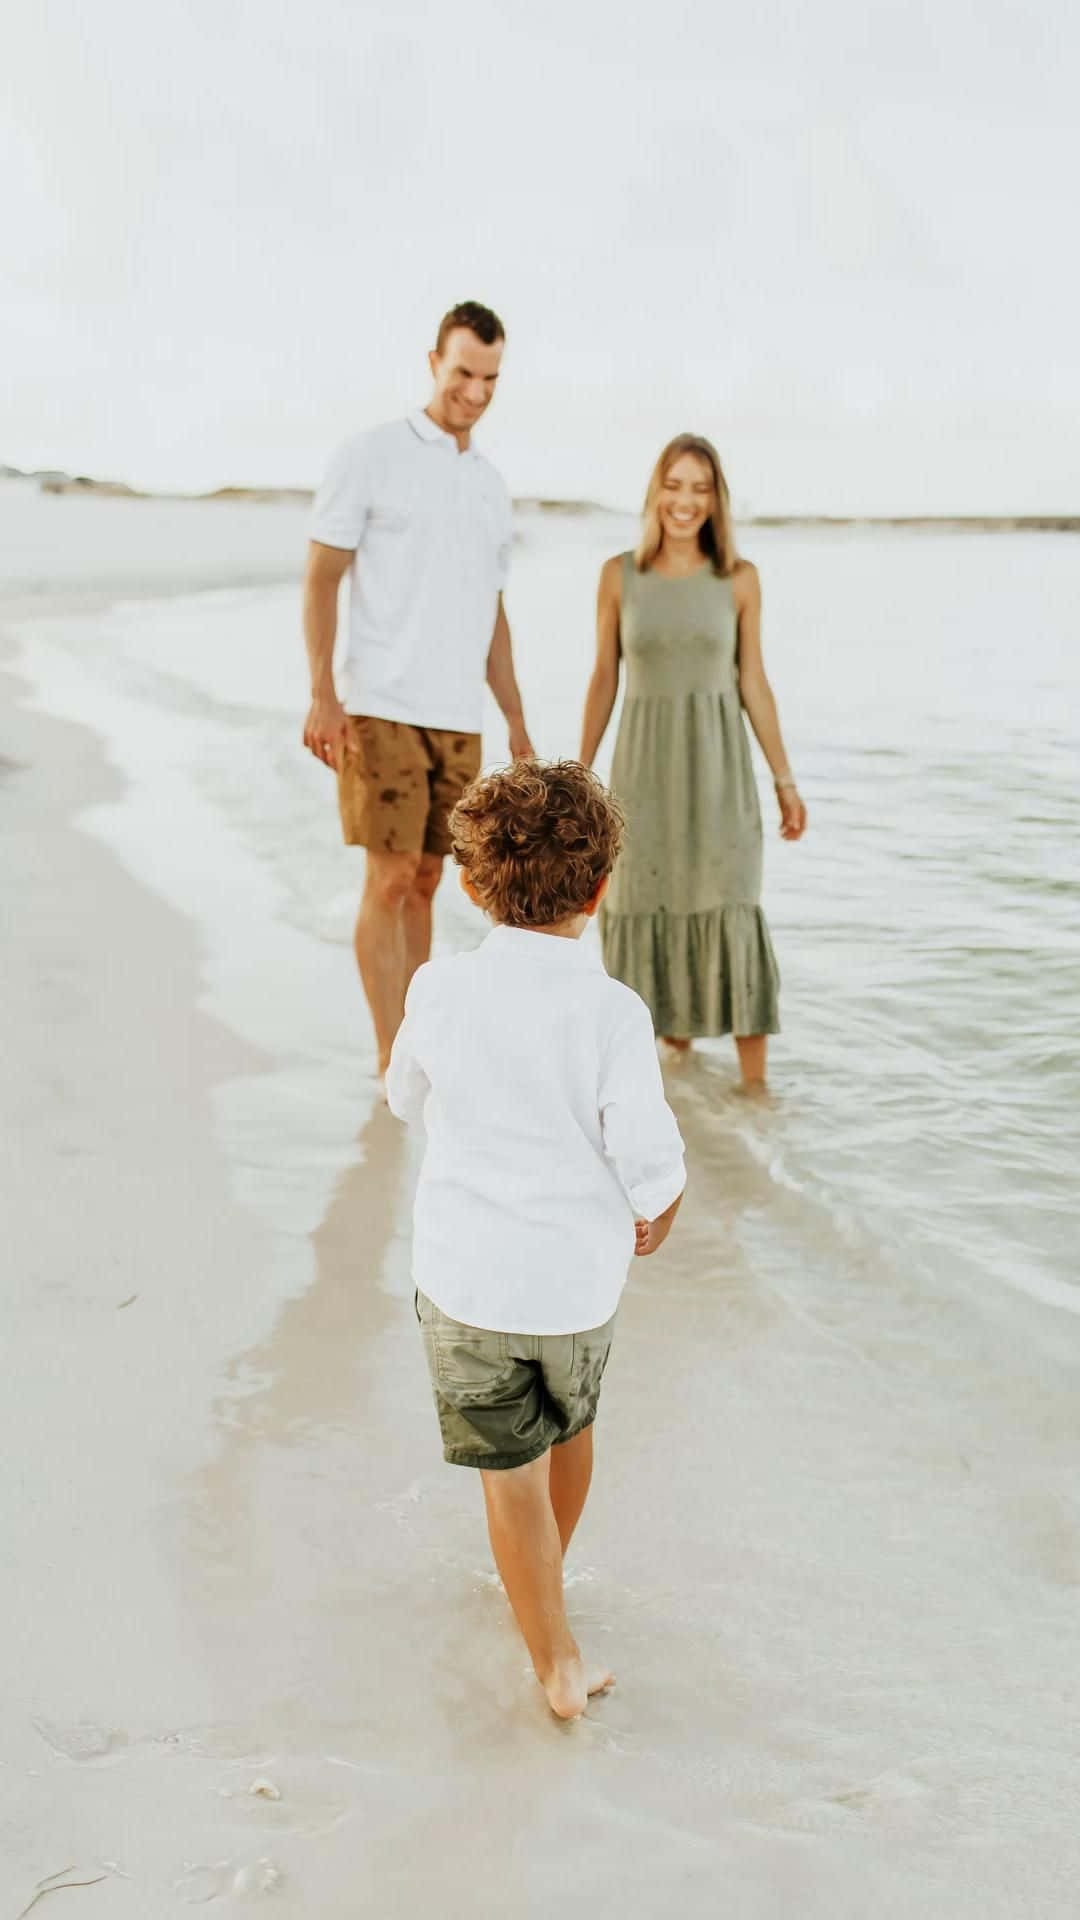 Family Walking On The Beach With A Young Boy